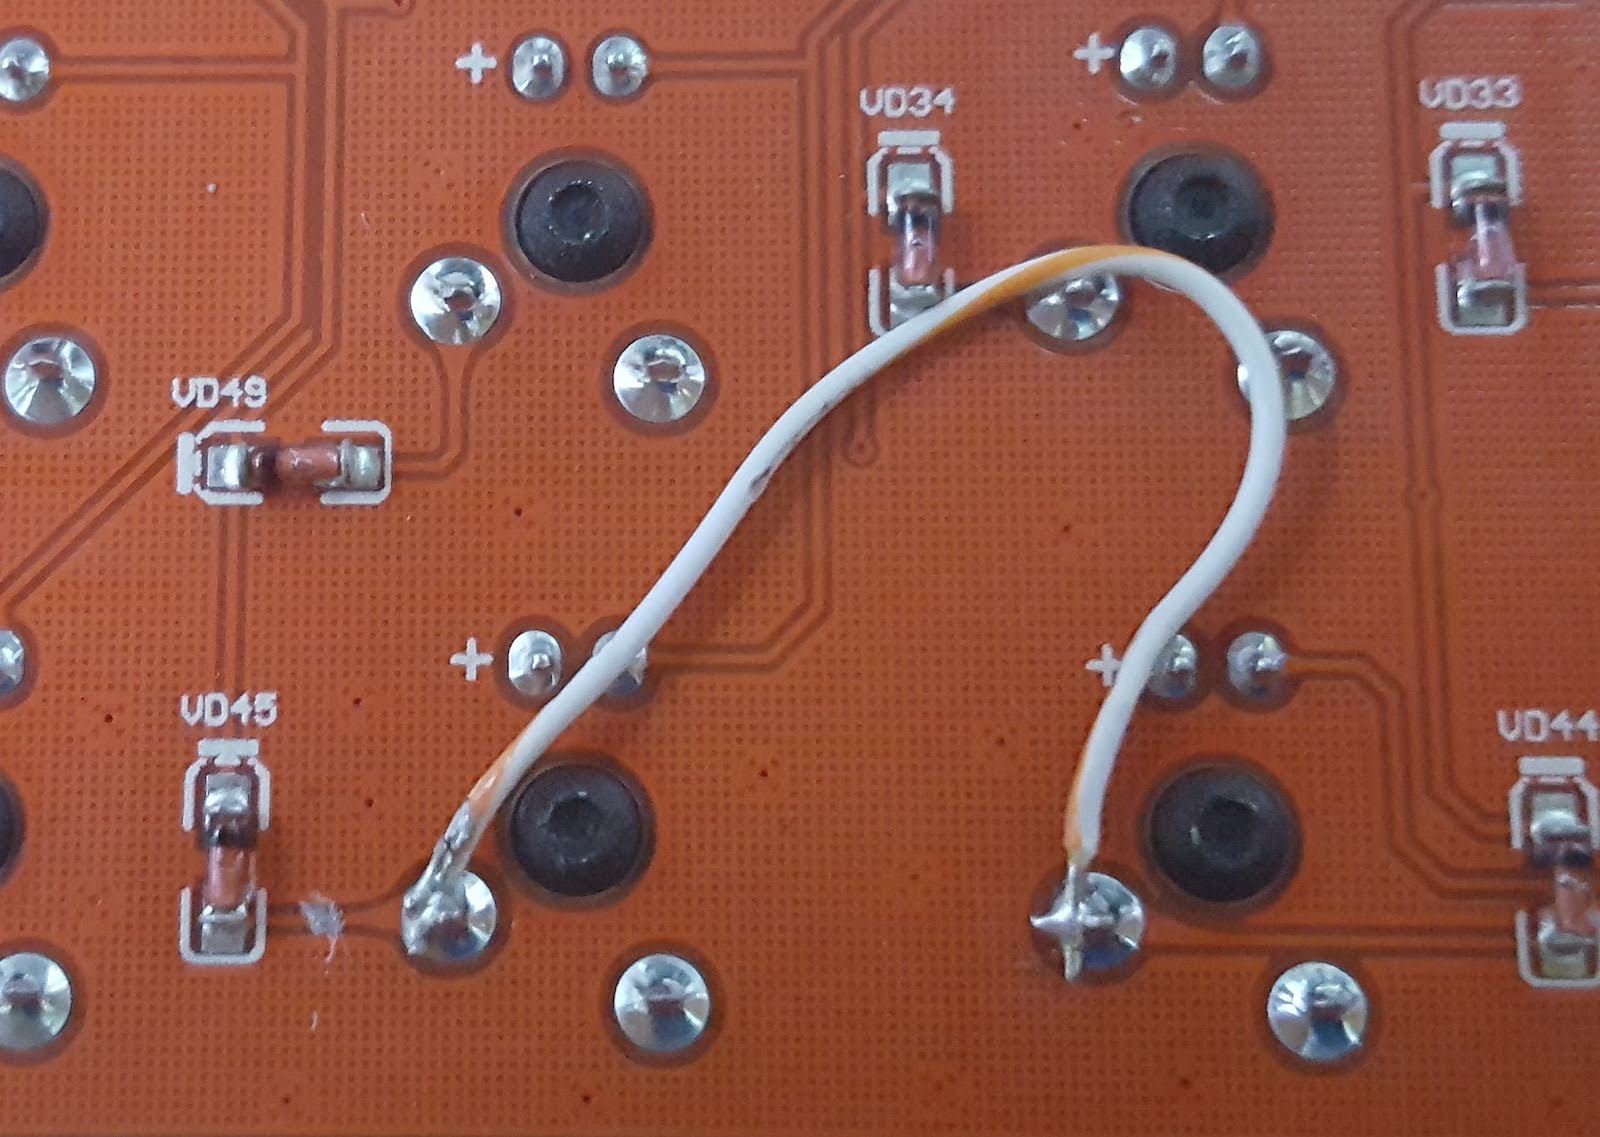 Figure 3: Changing the layout by brute force, cutting PCB tracks and bridging with wire. Three modifier keys were altered this way.